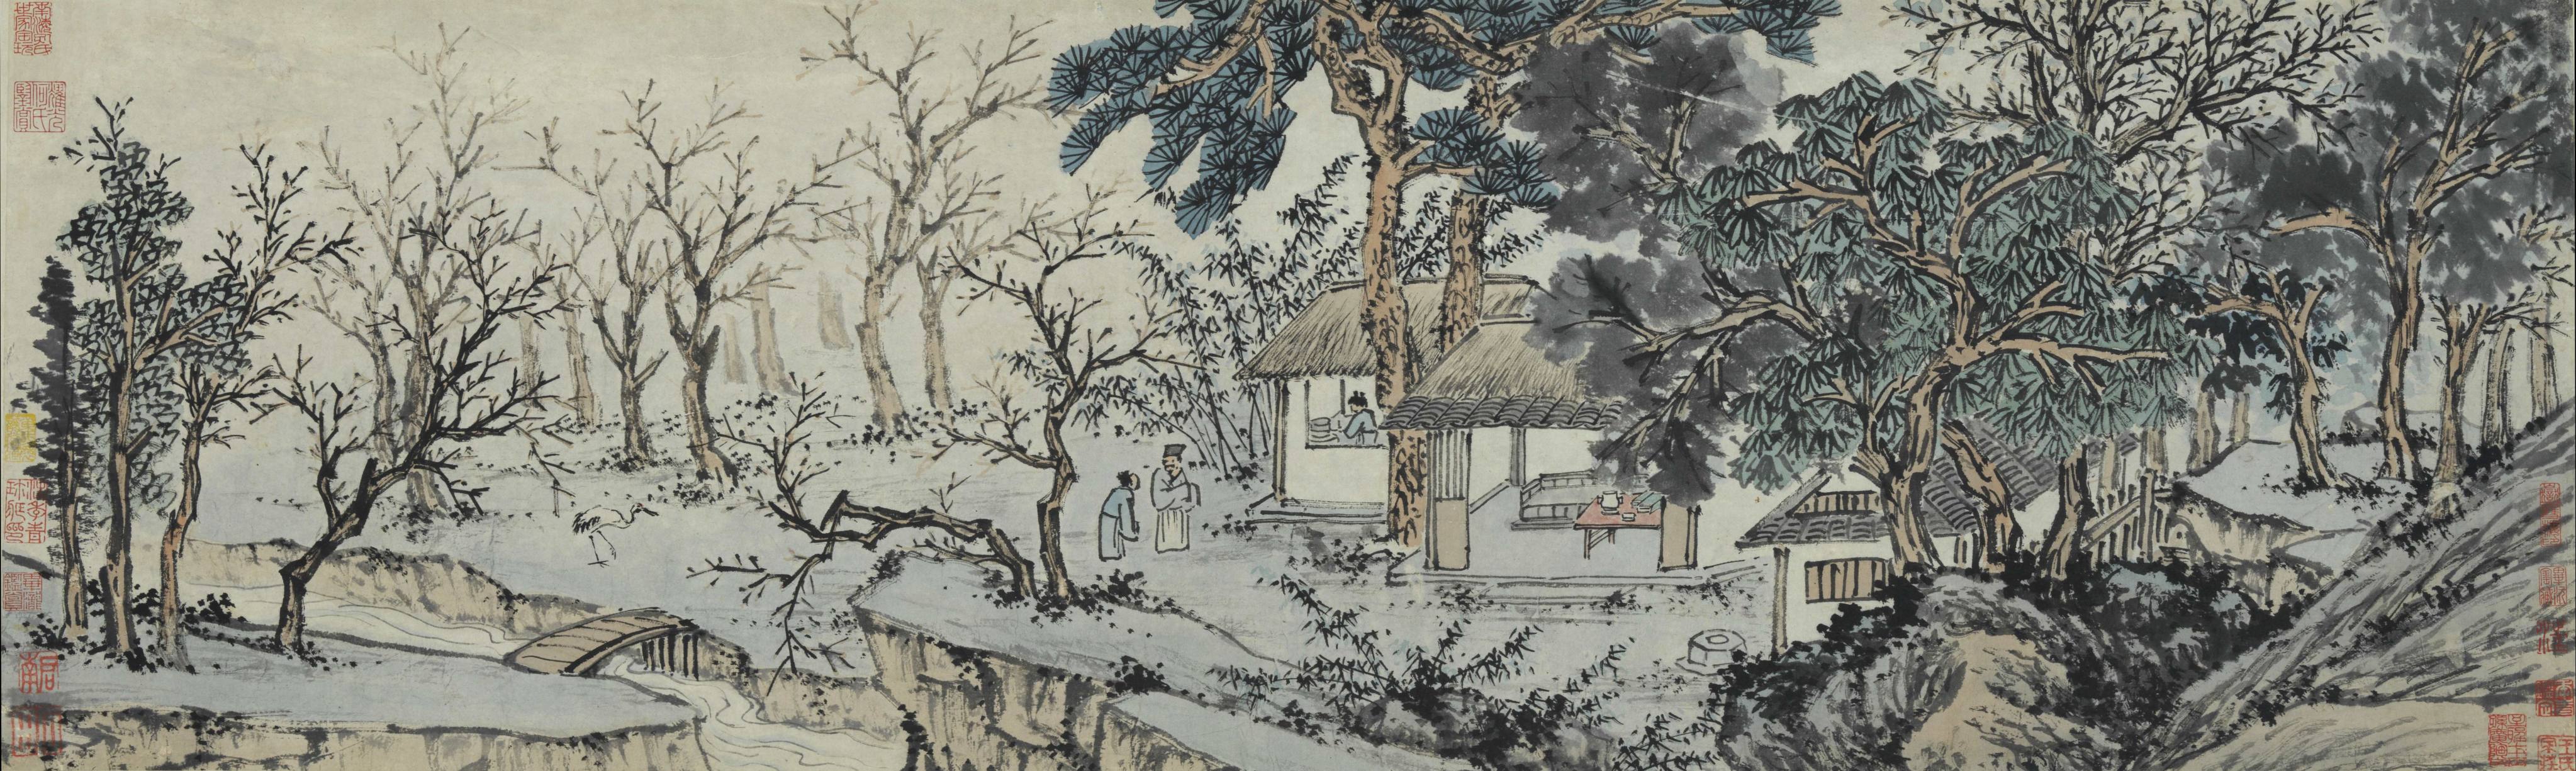 Detail from Ming dynasty artist Shen Zhou’s hand scroll “Hall of Preserving Confucianism” on display at the Hong Kong Museum of Art. Photo: Hong Kong Museum of Art